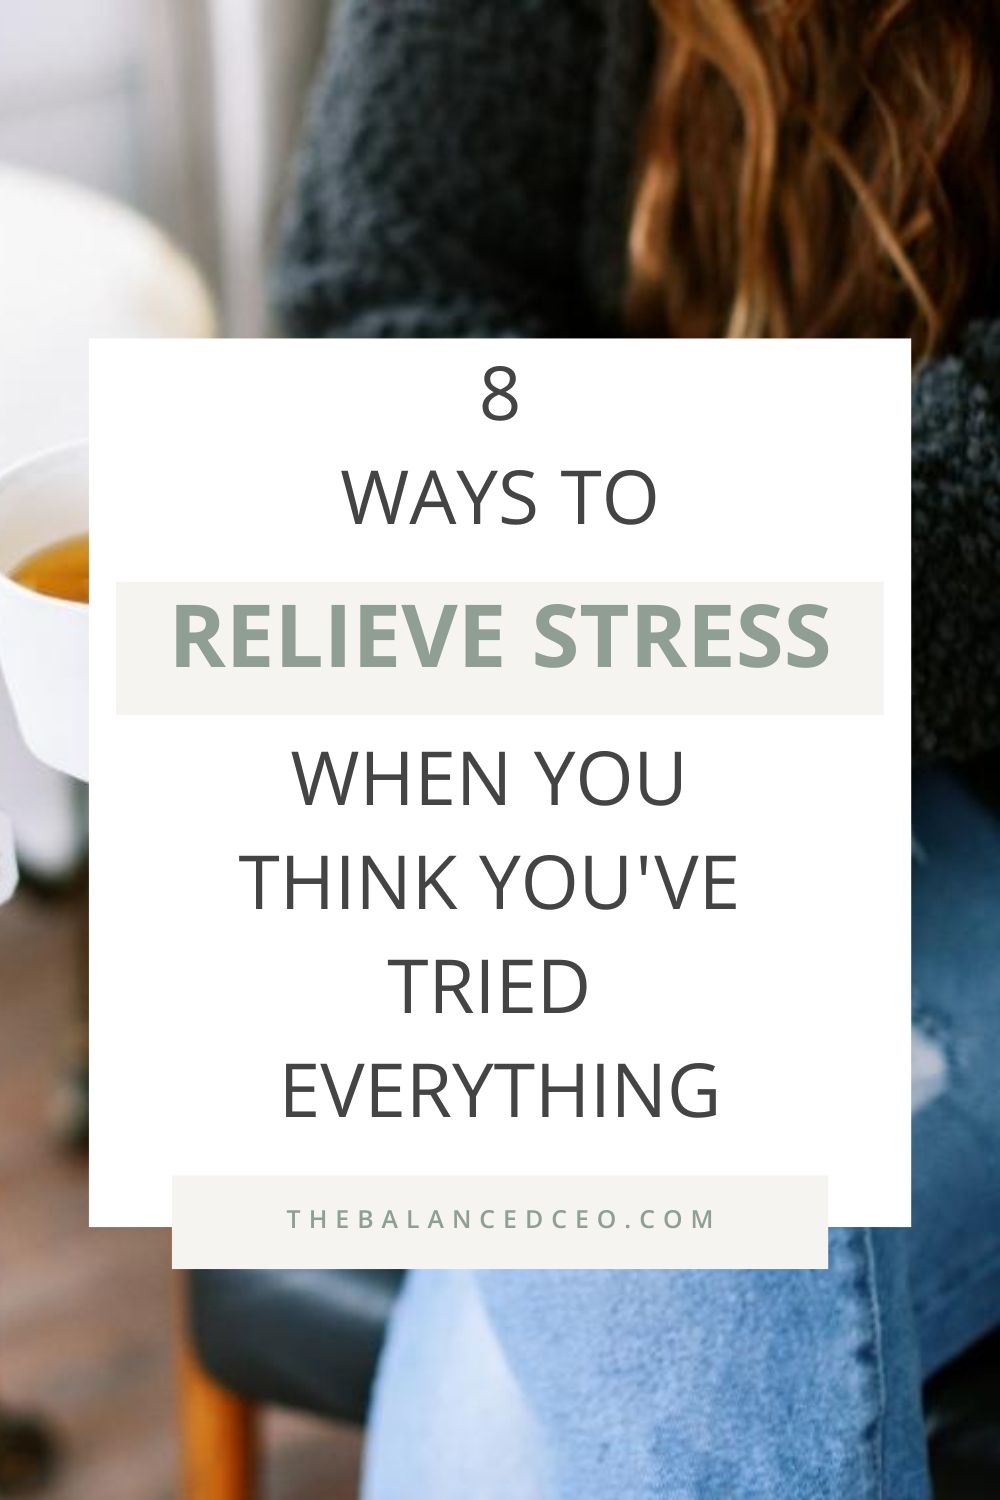 8 Ways to Relieve Stress When You Think You’ve Tried Everything